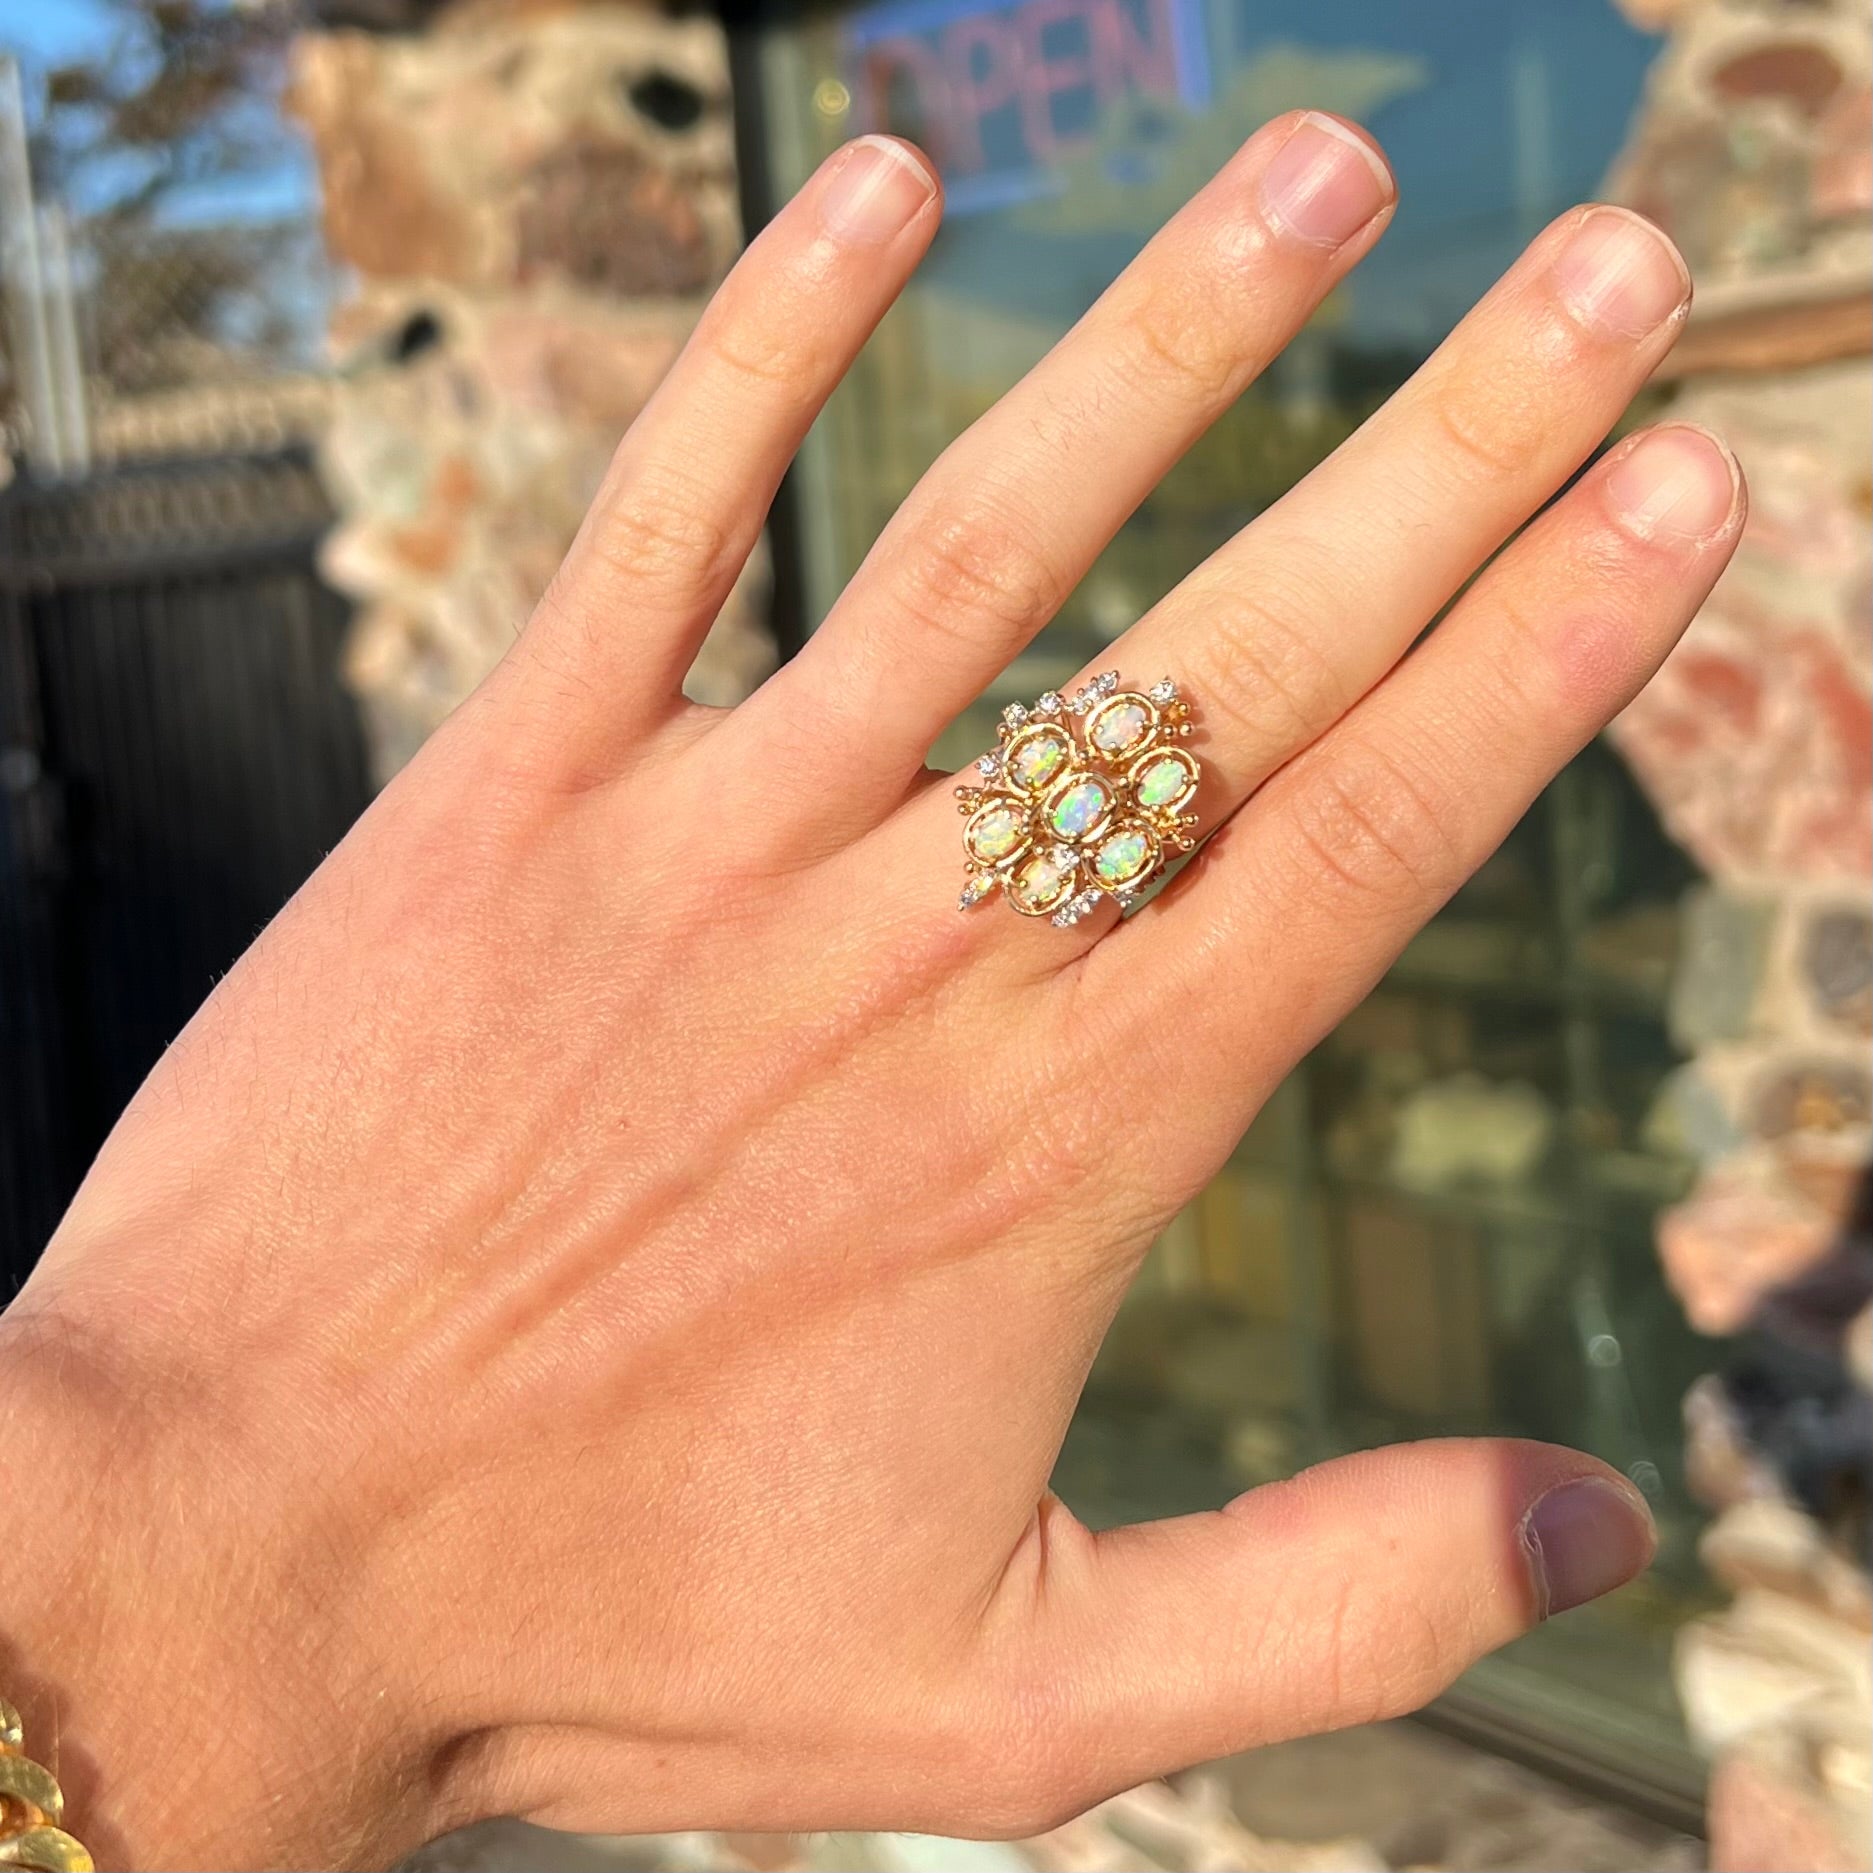 A ladies' vintage mid-century modern style opal and diamond cluster ring in yellow gold.